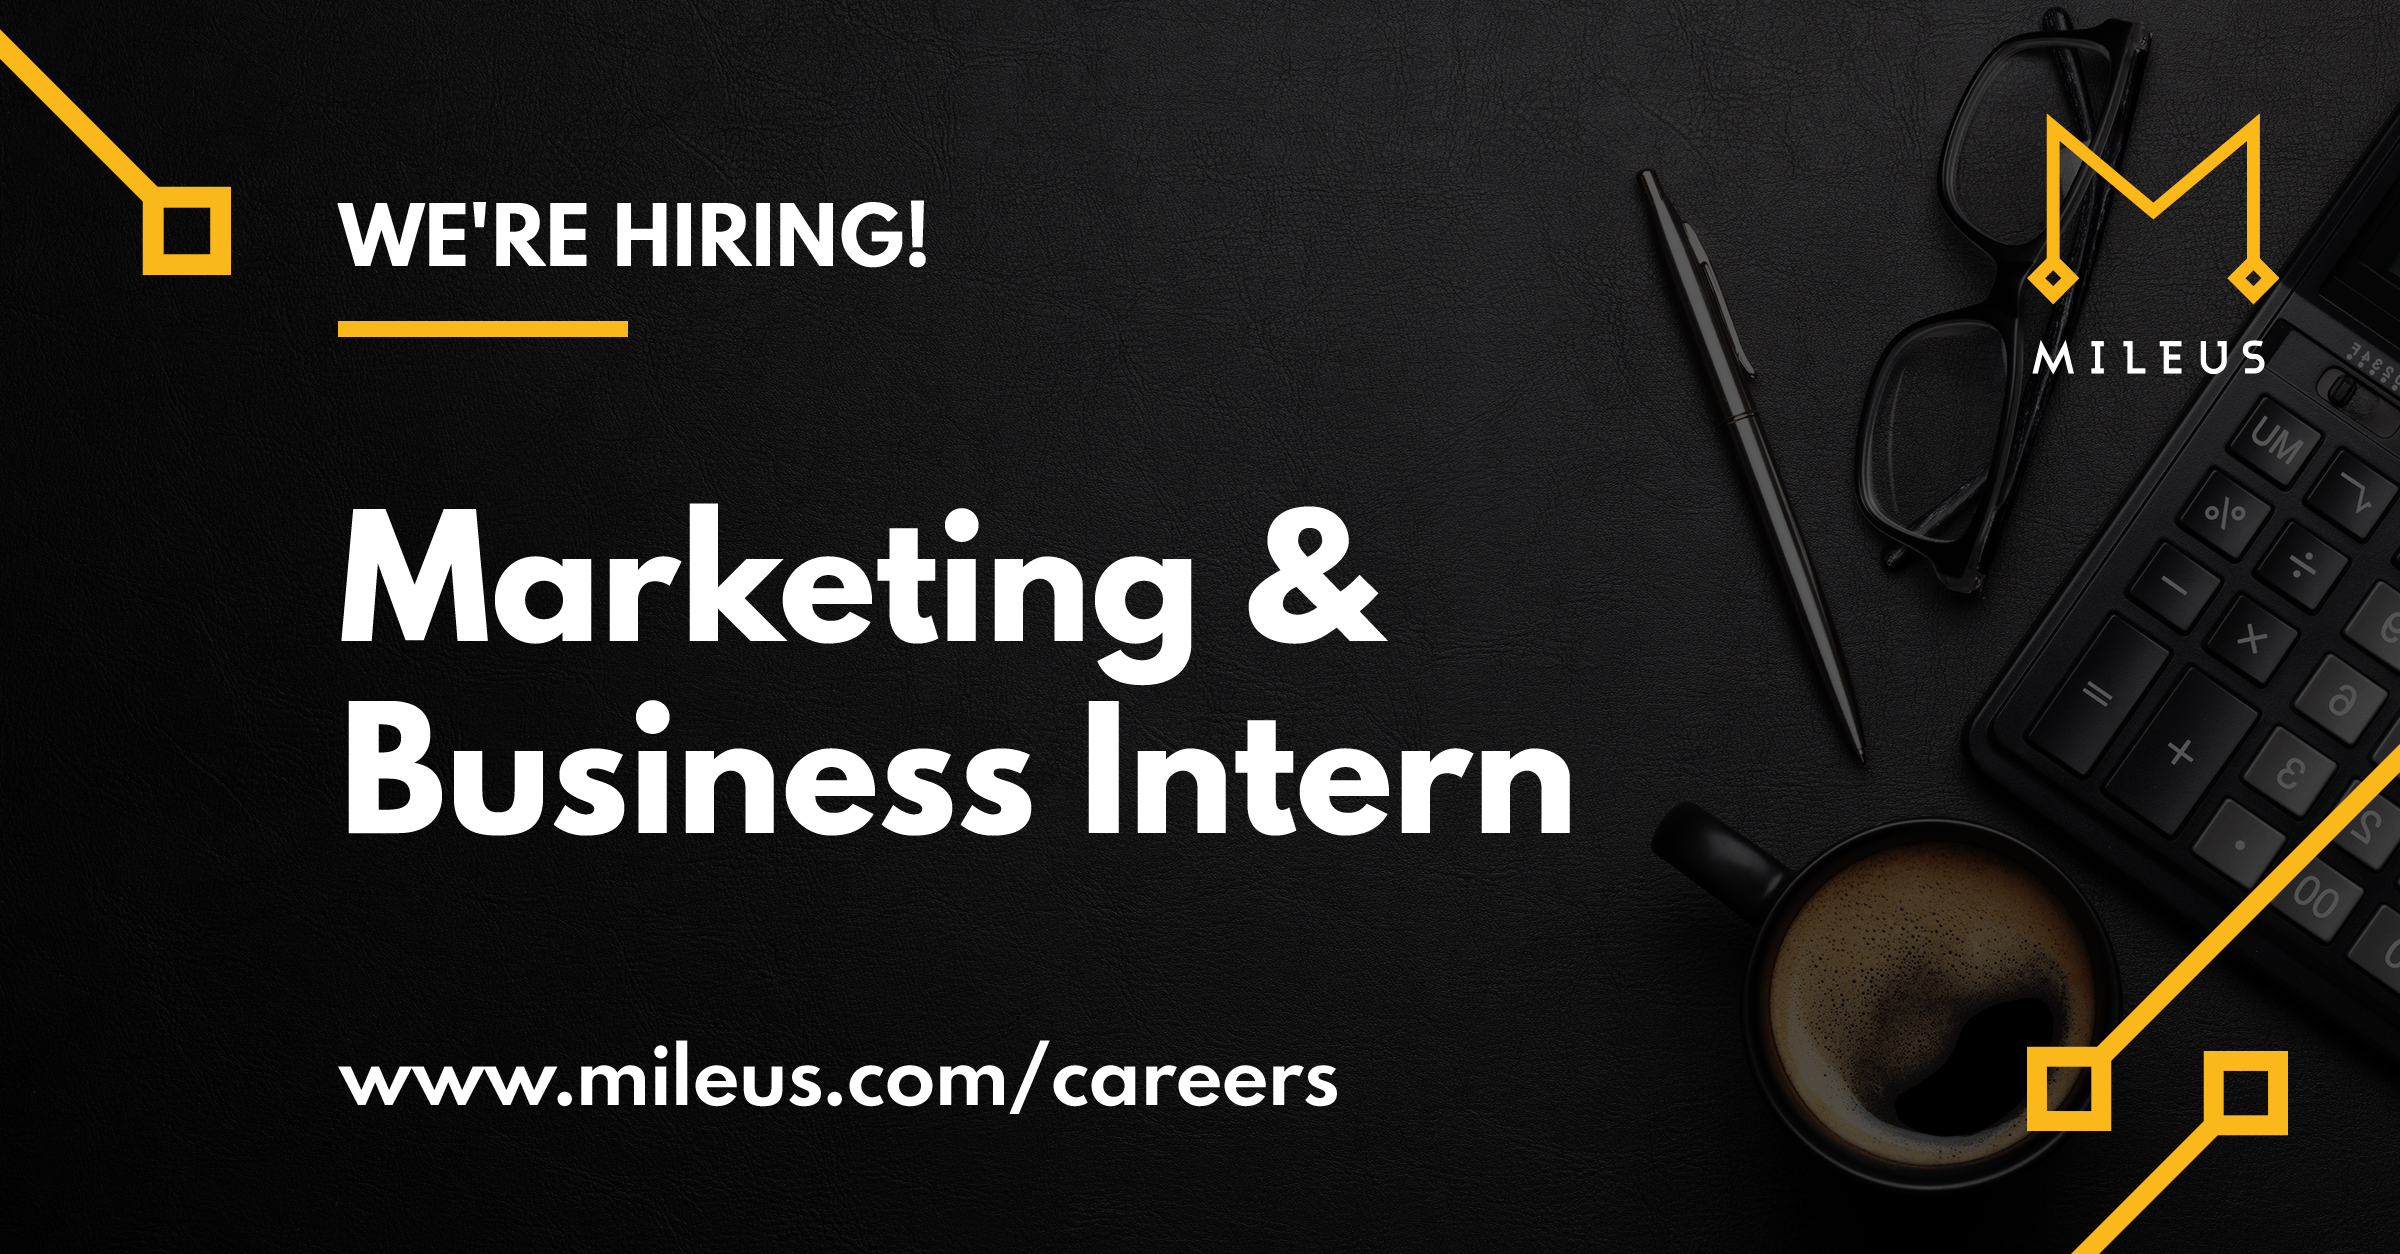 Hiring graphic image for the role of marketing & business intern